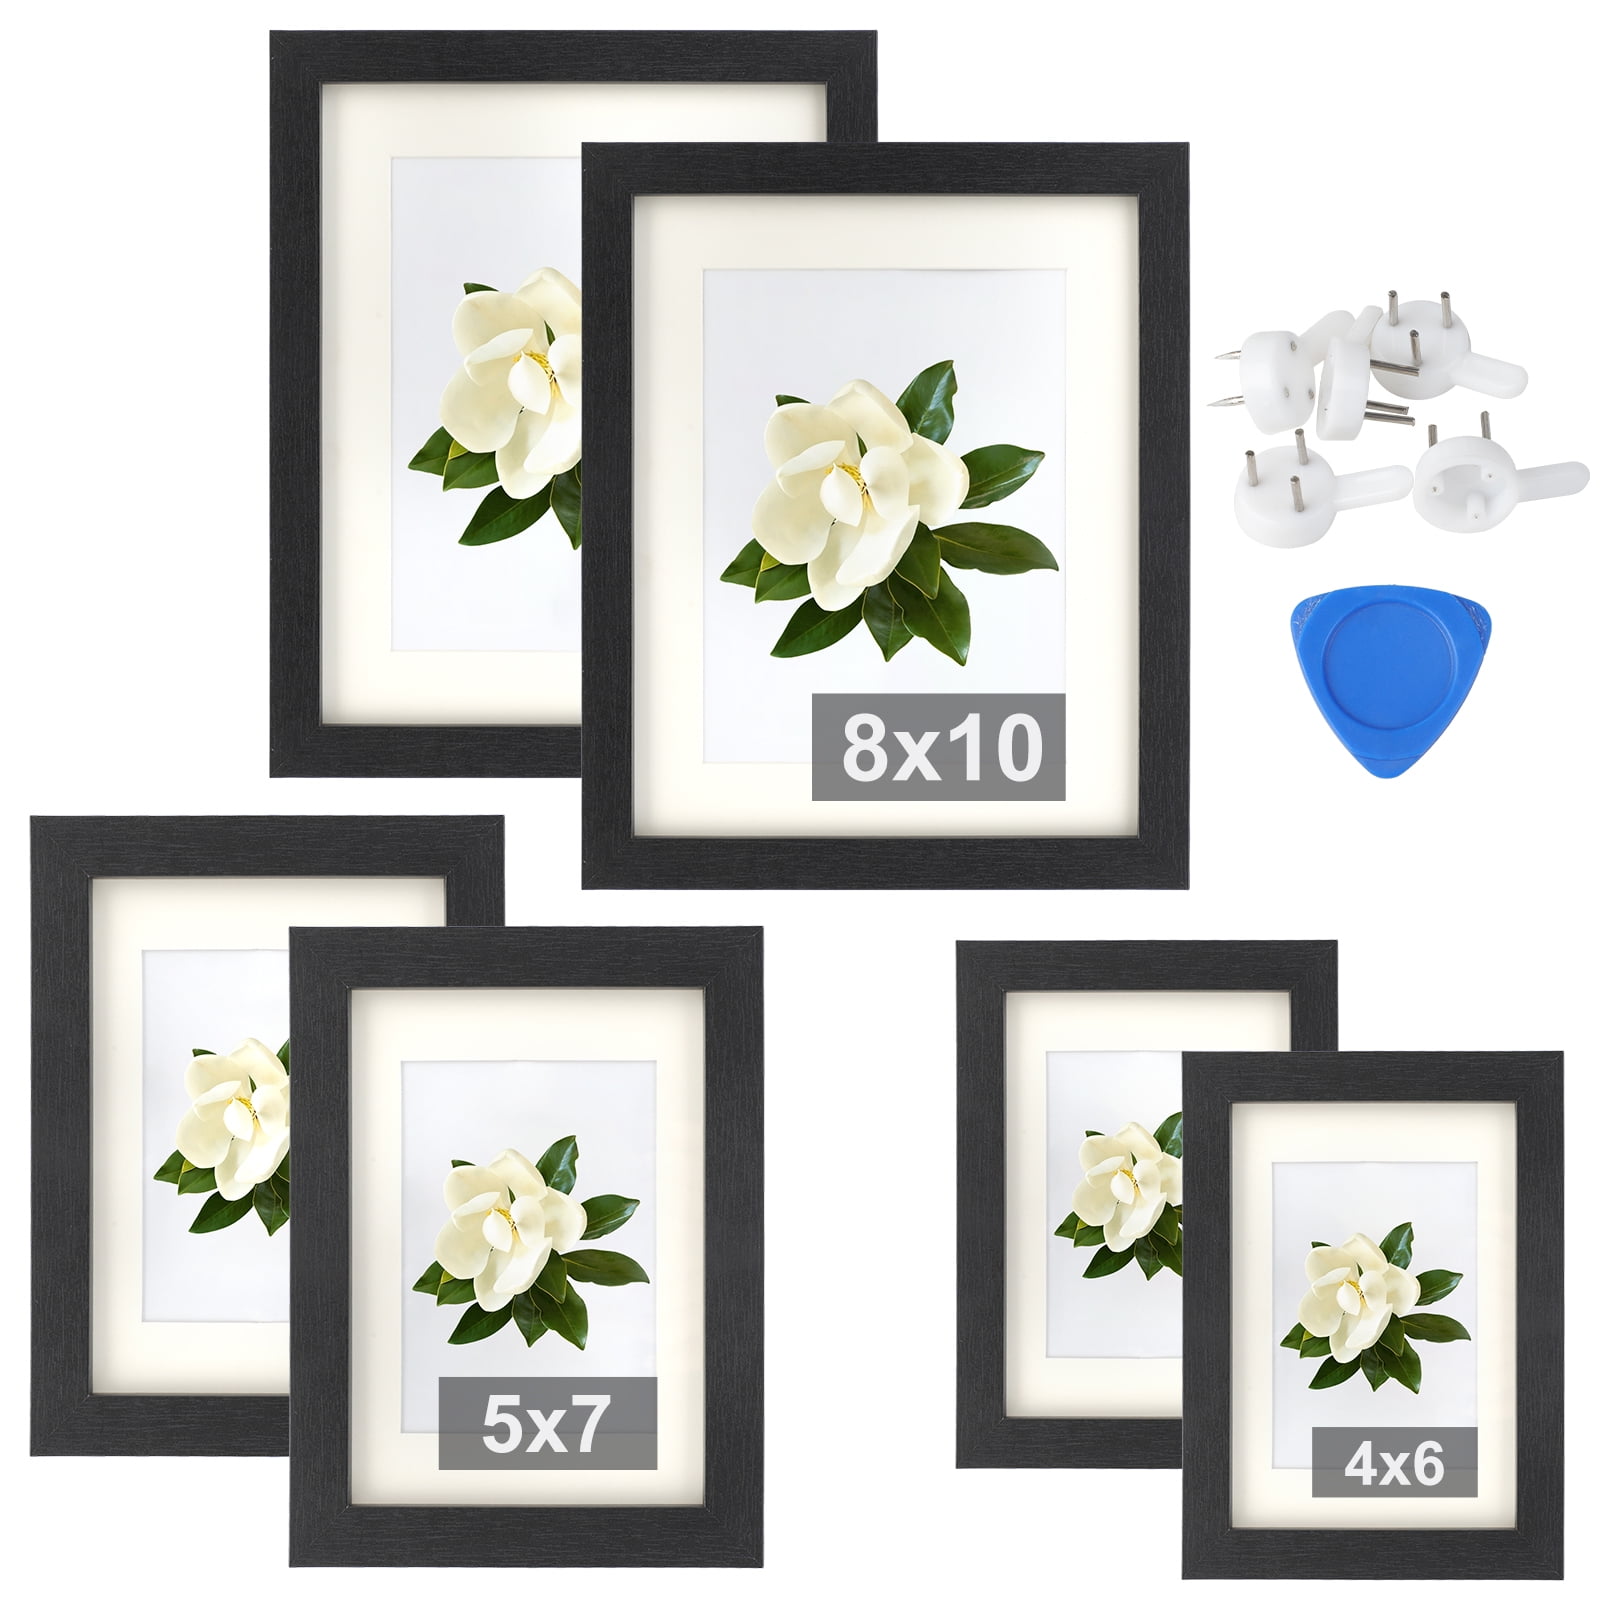 4x6-8x10 Multiple Size & Design Photo/Picture Frames Horizontal or Vertical 